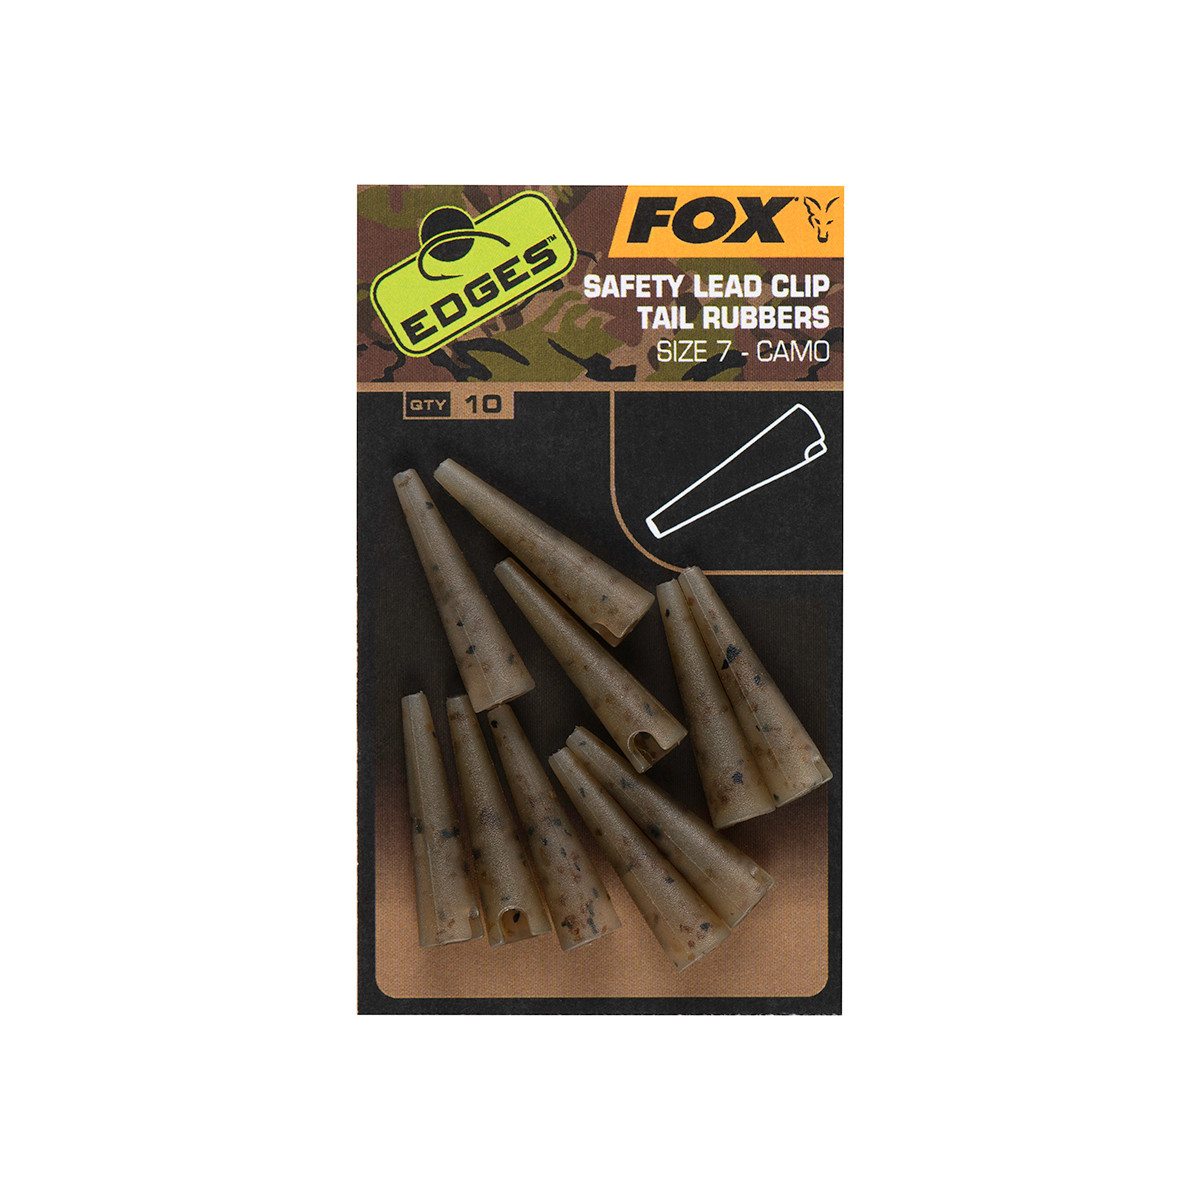 FOX EDGES CAMO SAFETY LEAD CLIP TAIL RUBBERS